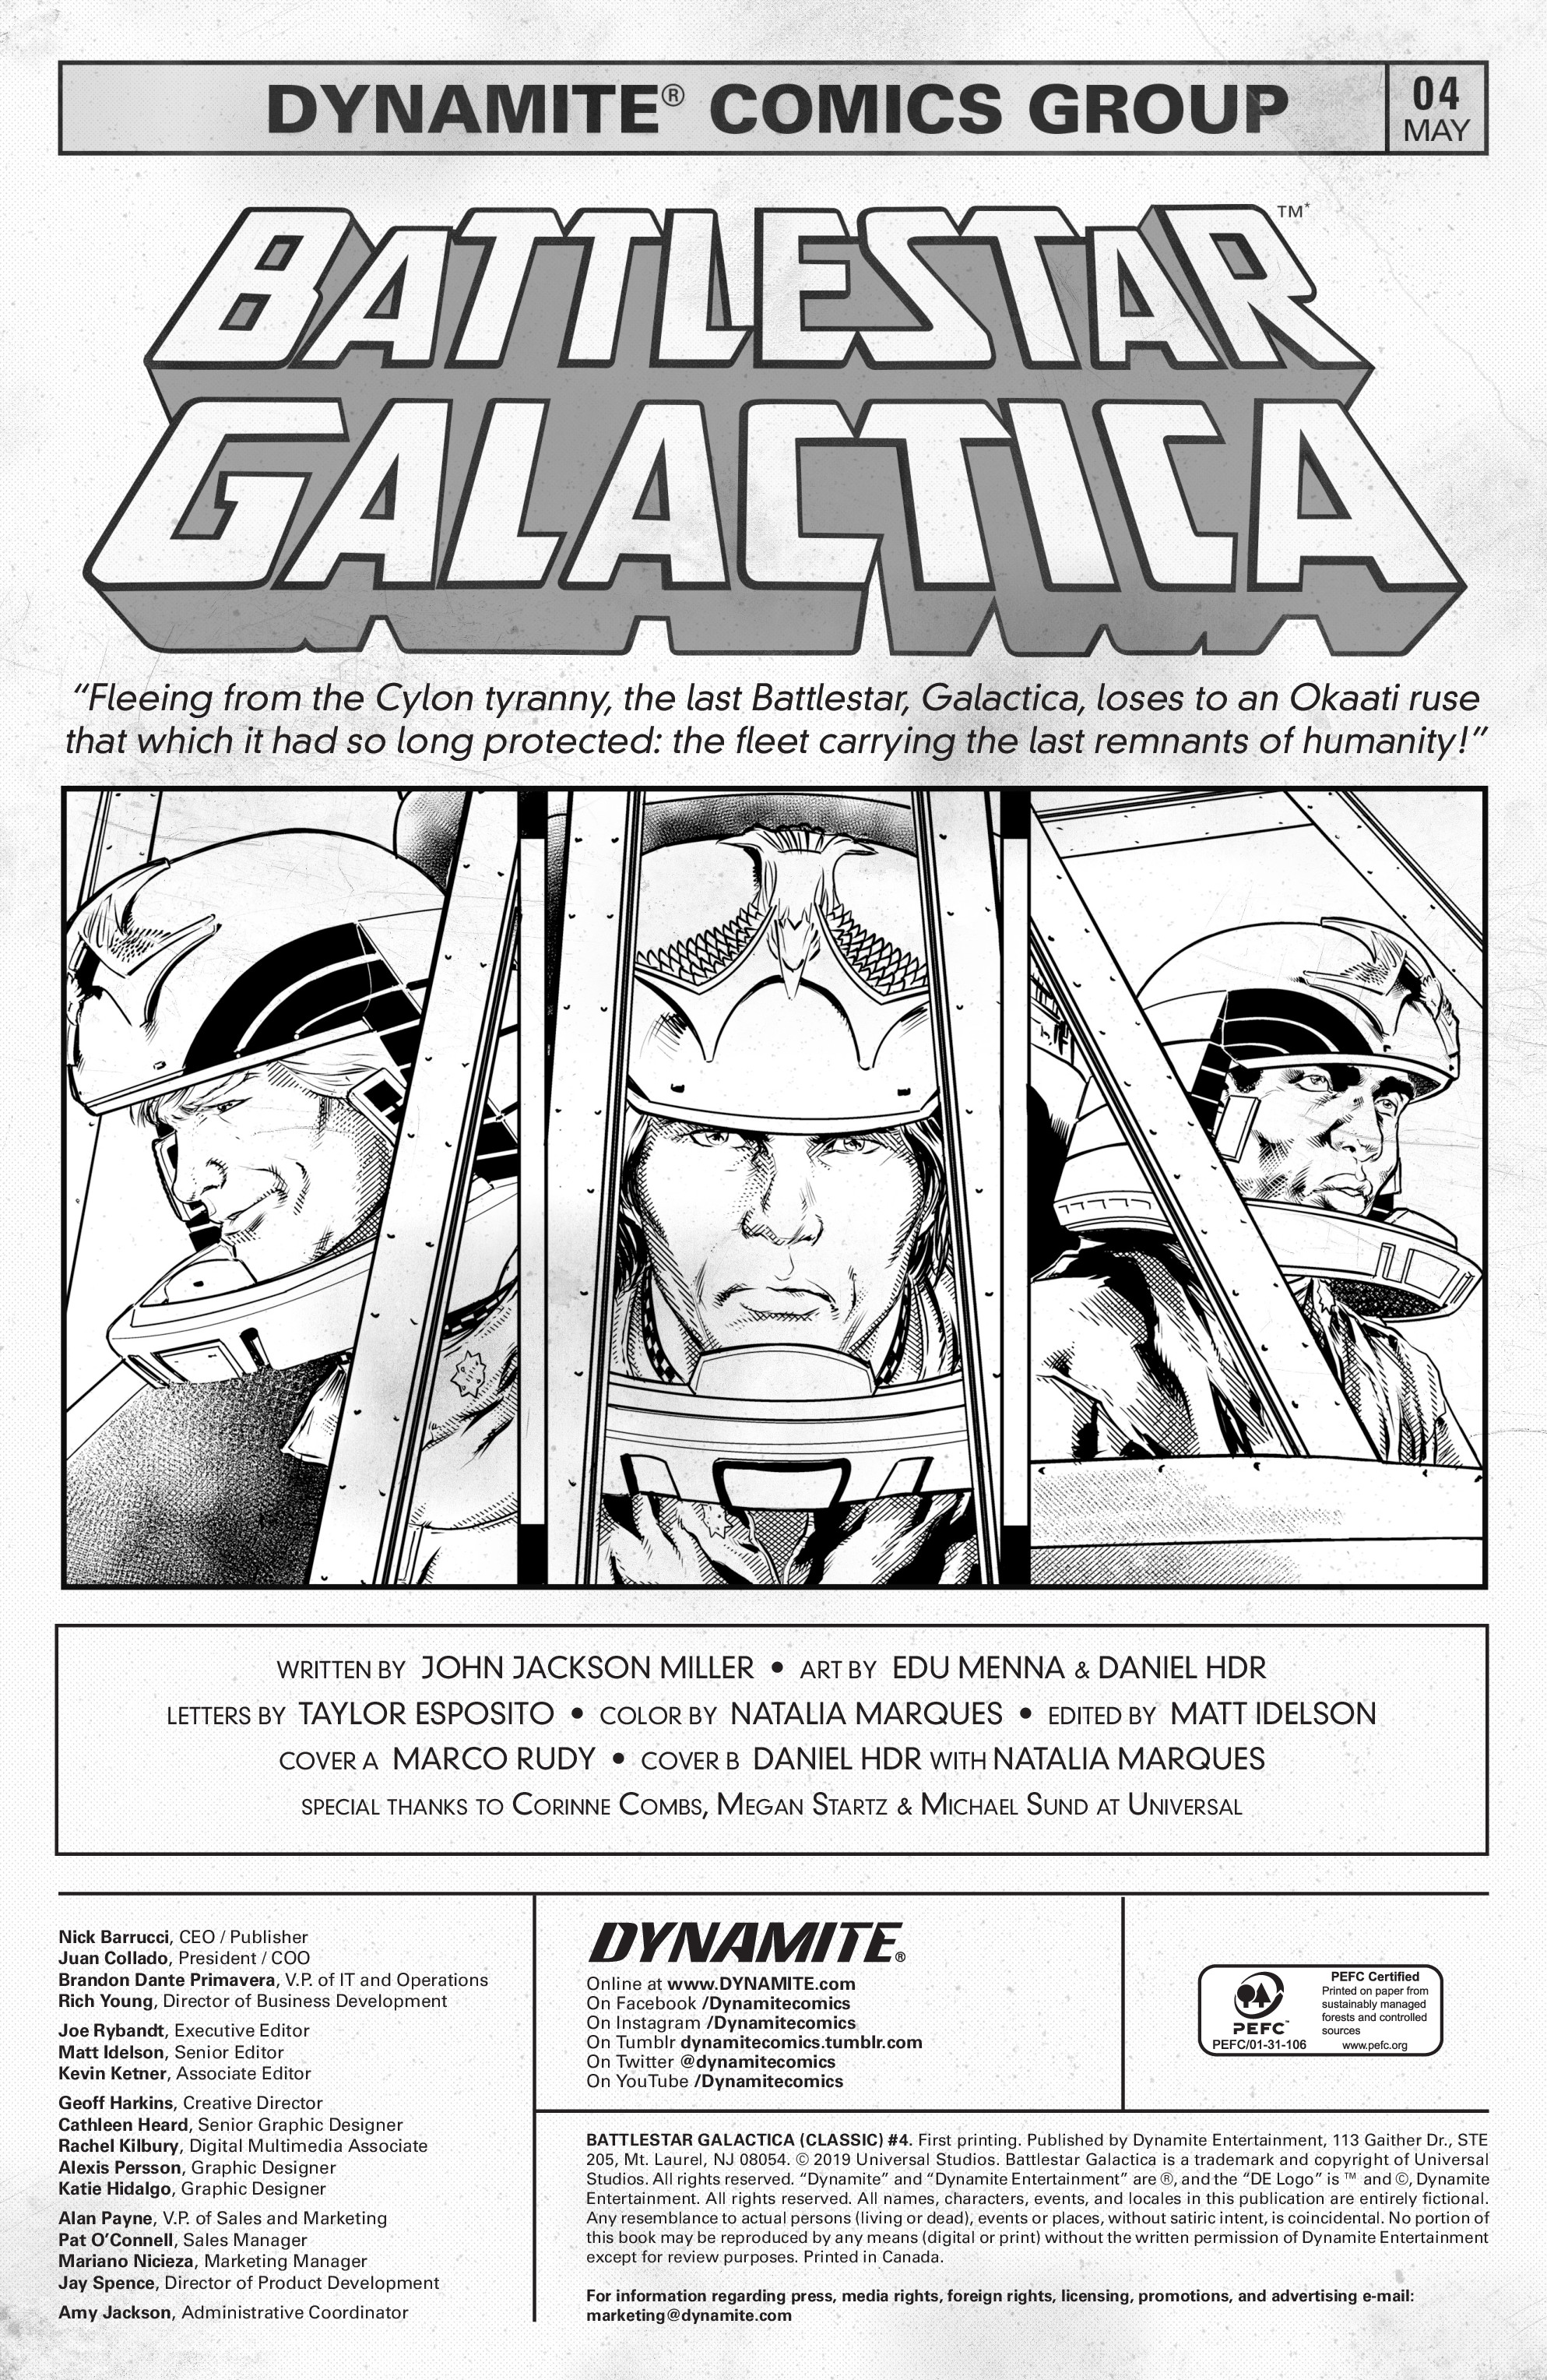 Battlestar Galactica: Classic (2018-): Chapter 4 - Page 3